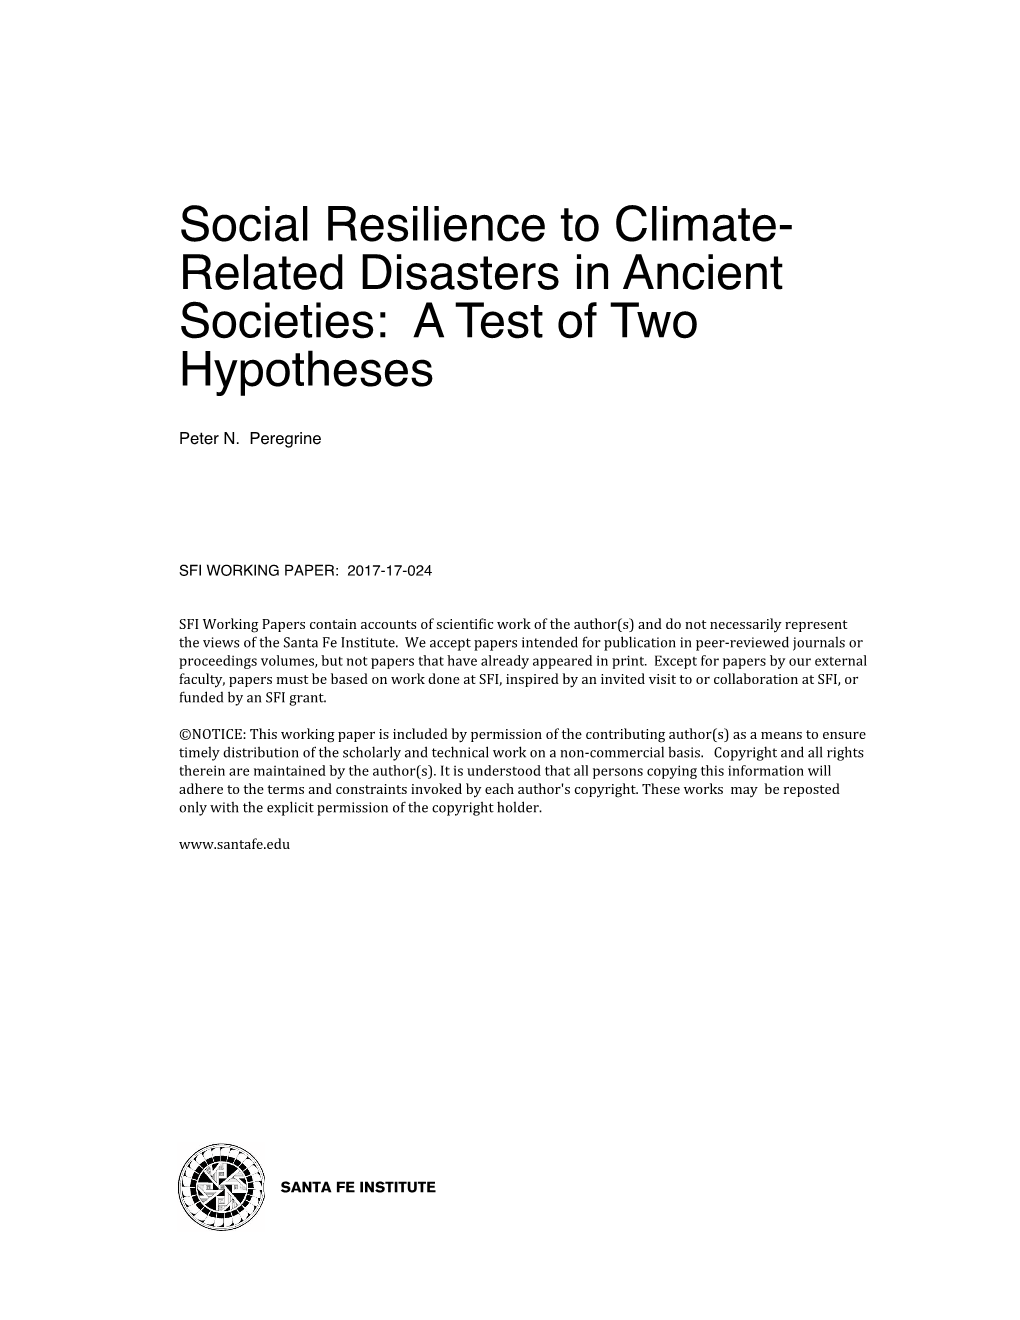 Social Resilience to Climate- Related Disasters in Ancient Societies: a Test of Two Hypotheses